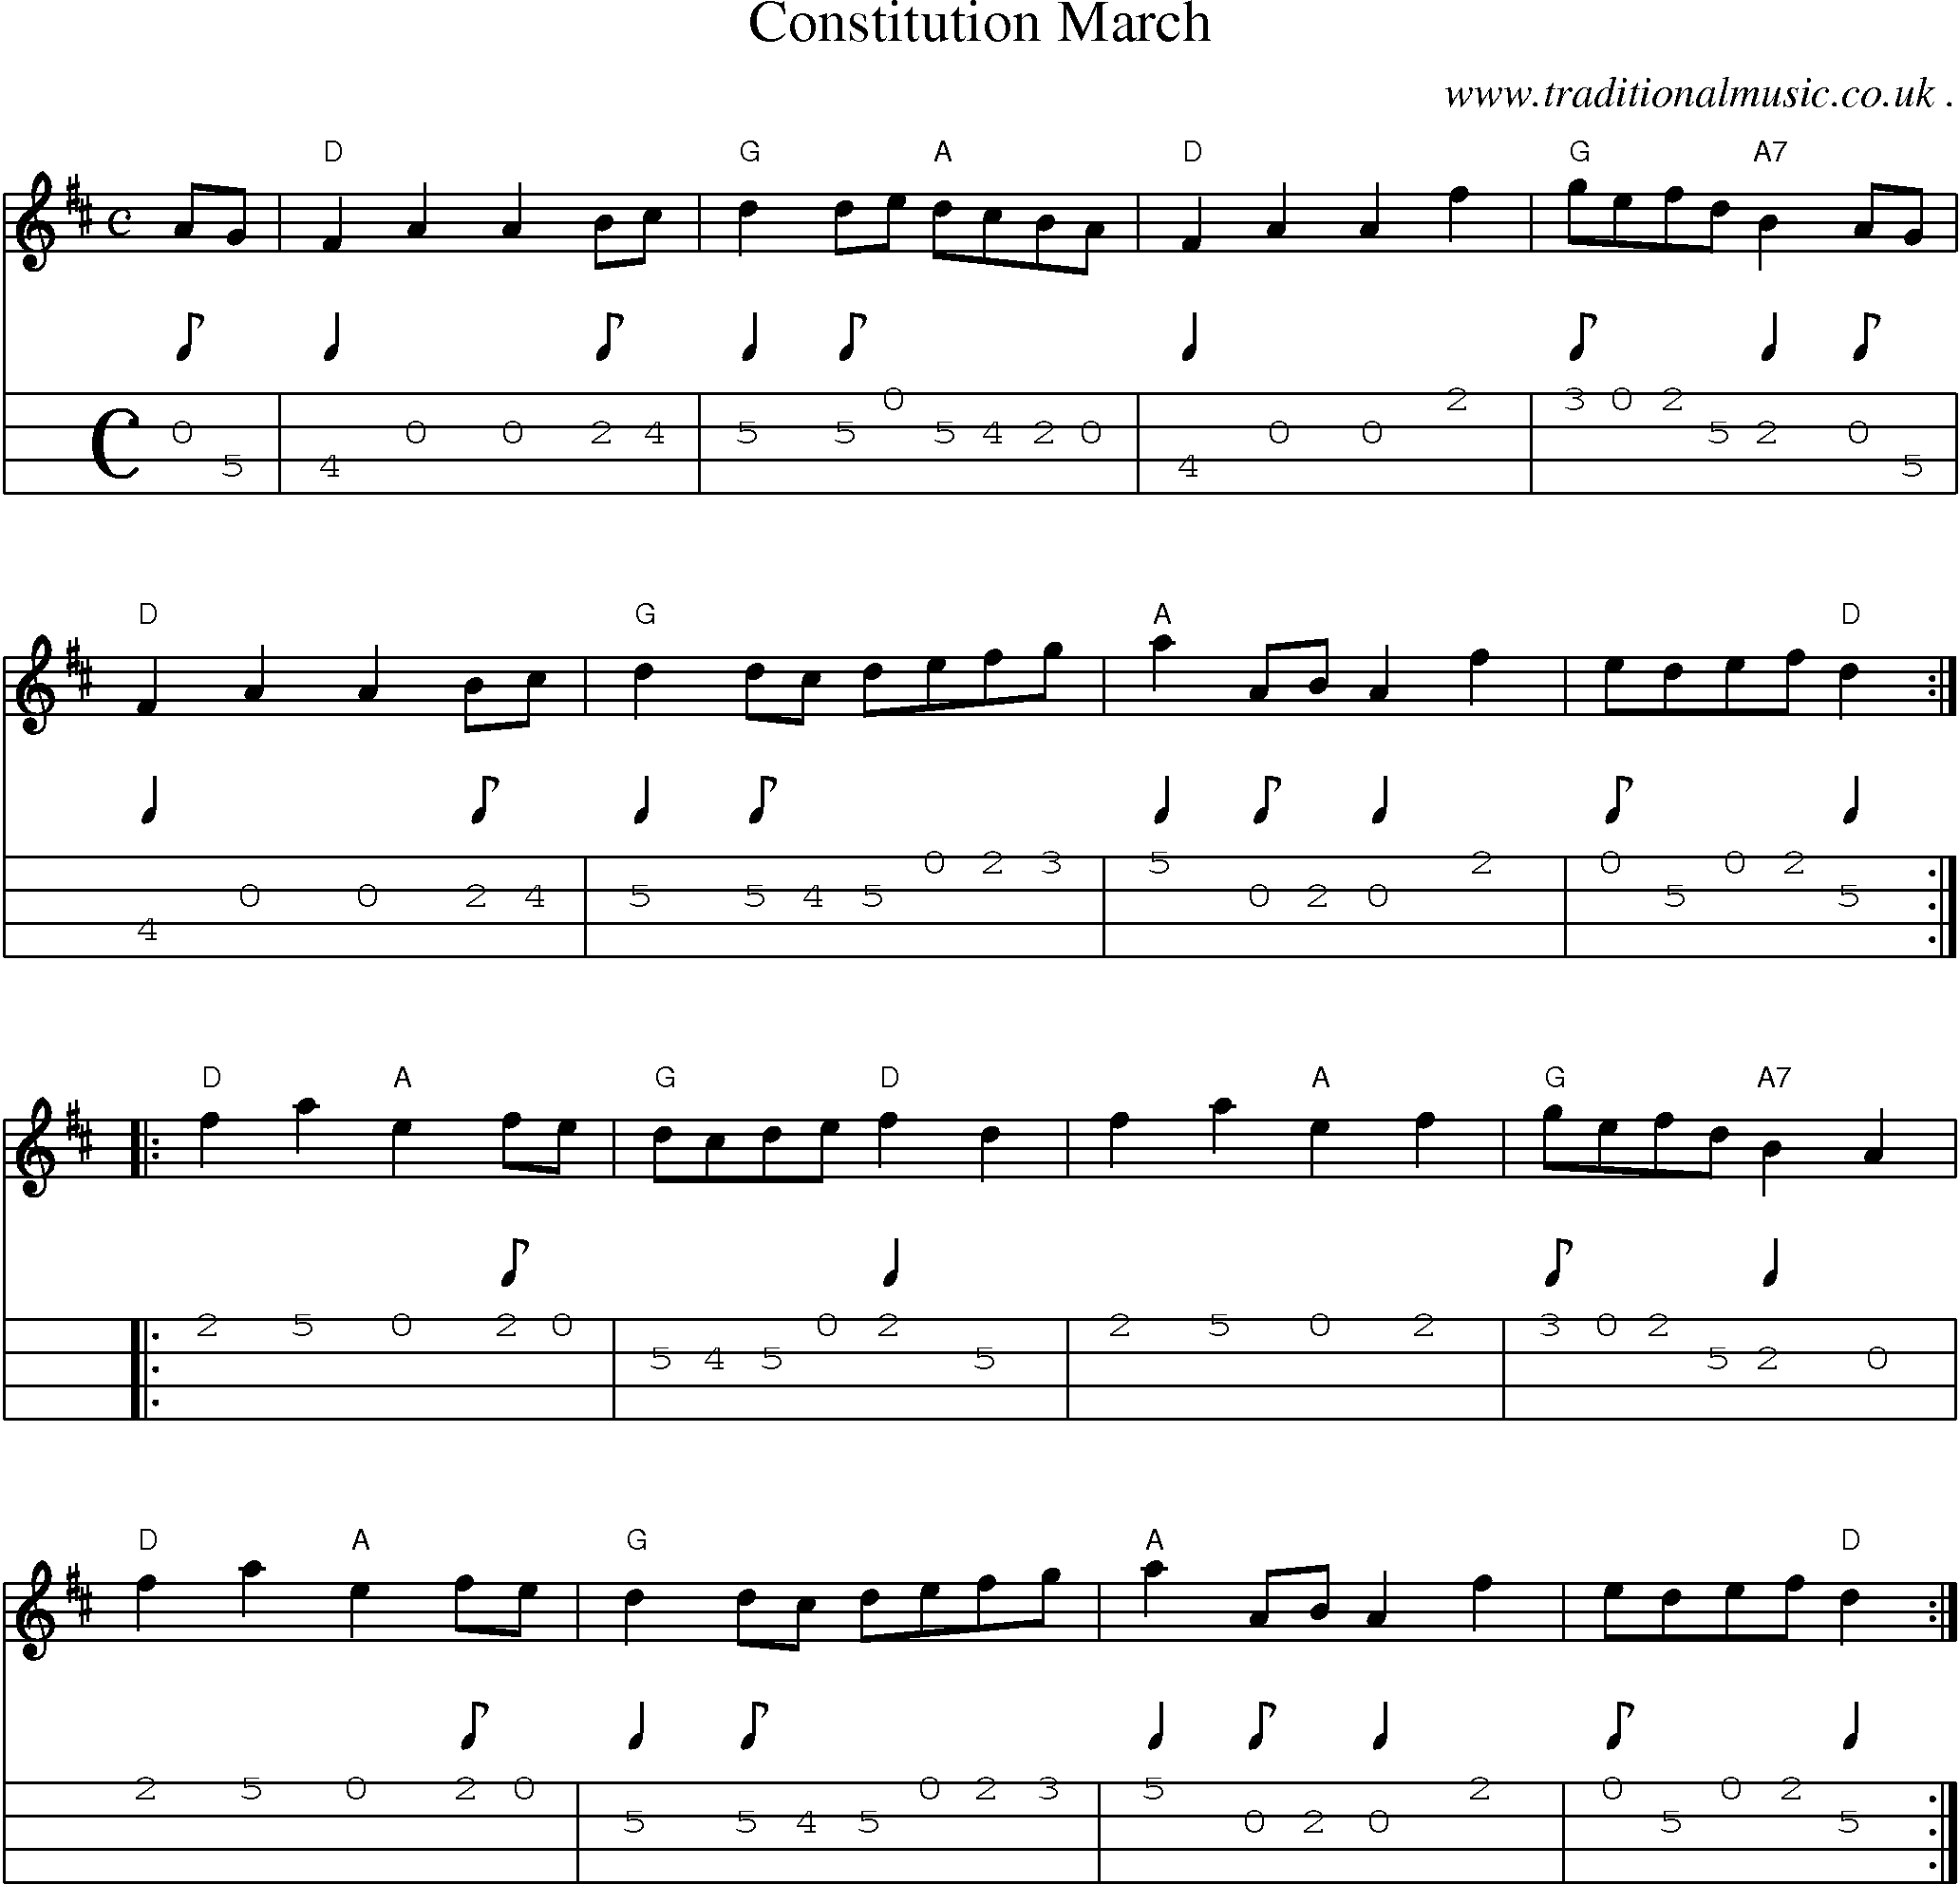 Music Score and Guitar Tabs for Constitution March